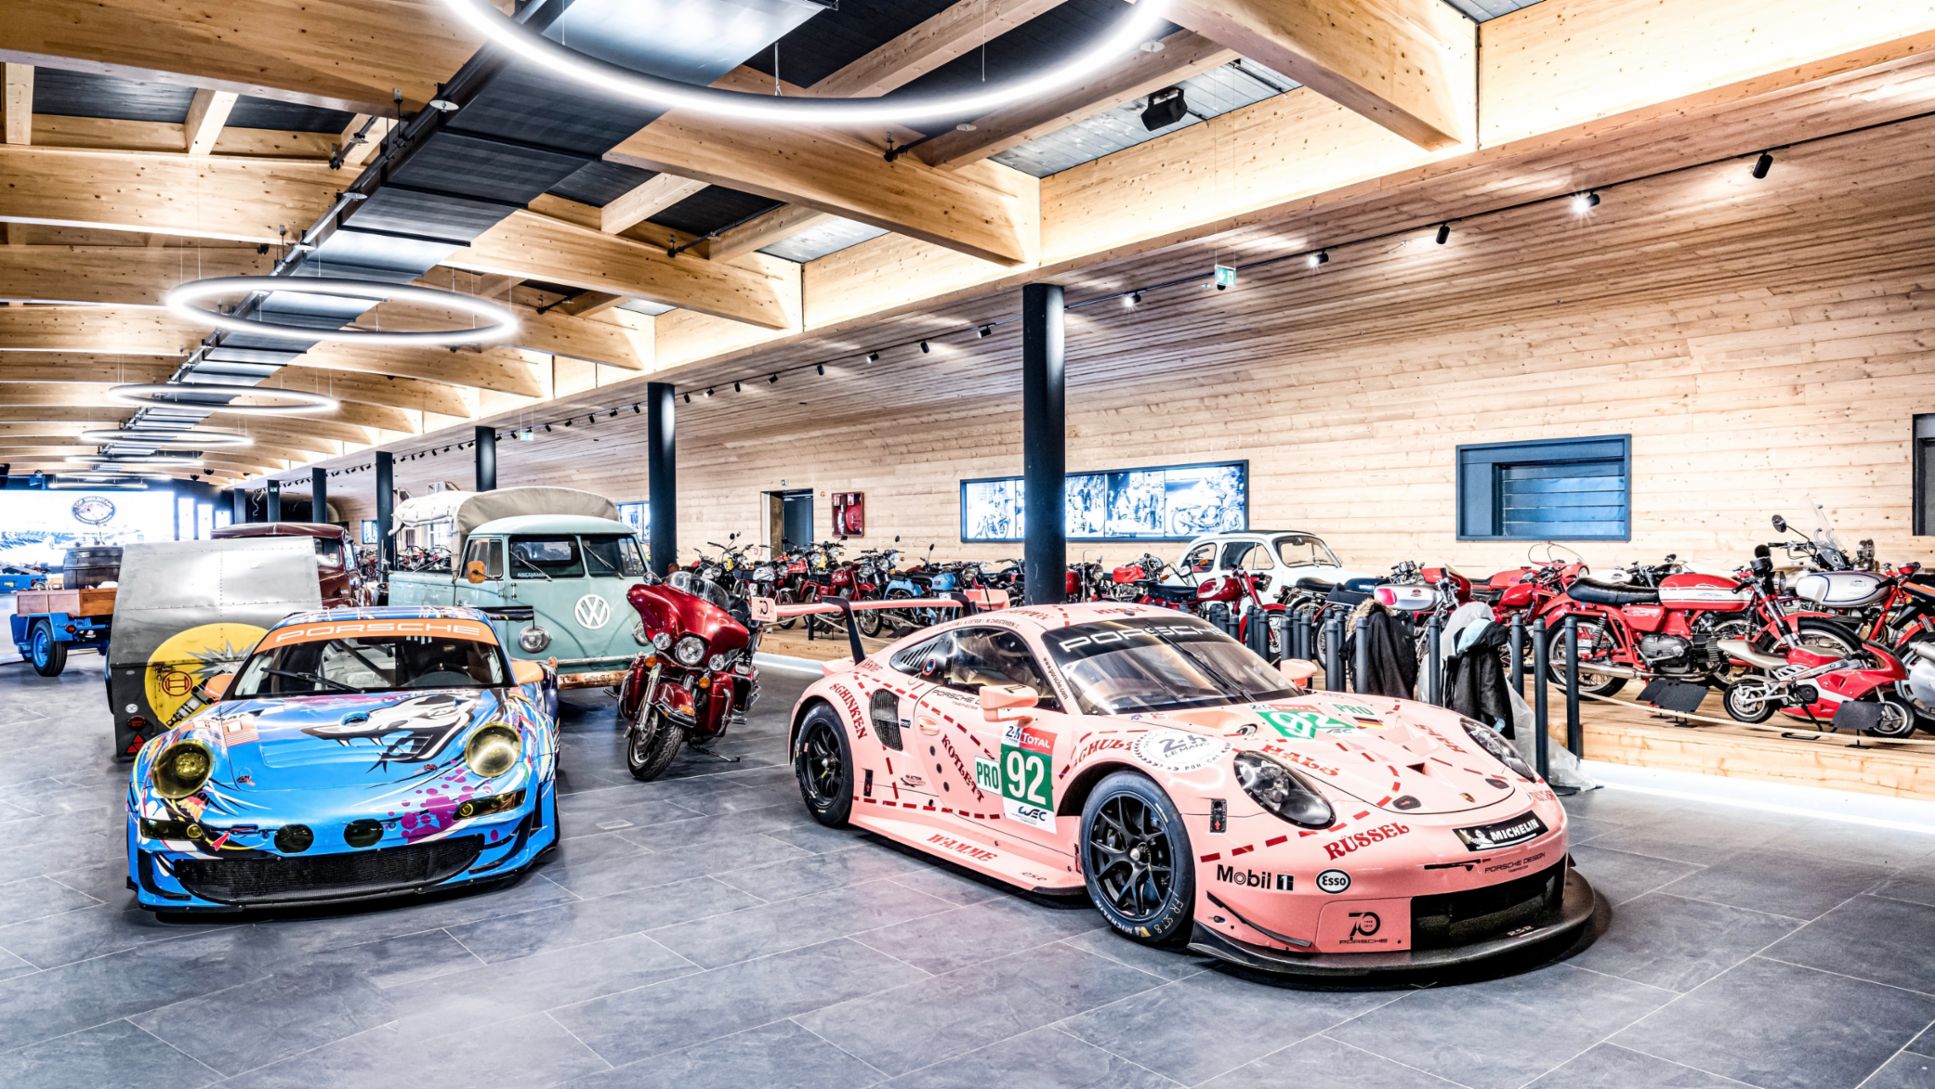 Porsche concludes its worldwide Le Mans Roadshow with two exhibitions - Image 1